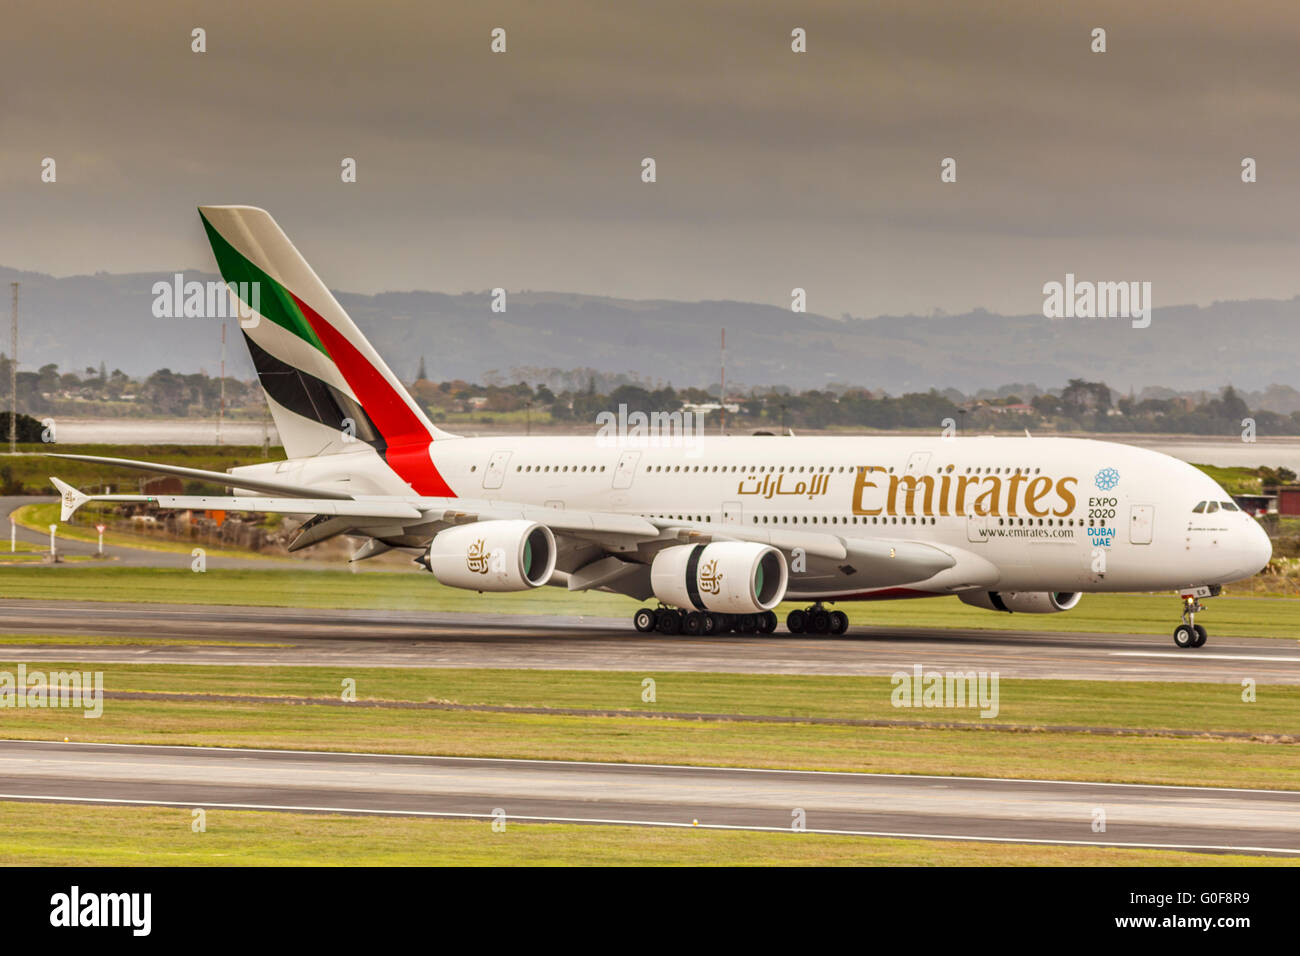 Emirates airline Airbus A380 jet aircraft  super jumbo just landed on runway at AKL airport,Auckland,North Island,New Zealand Stock Photo